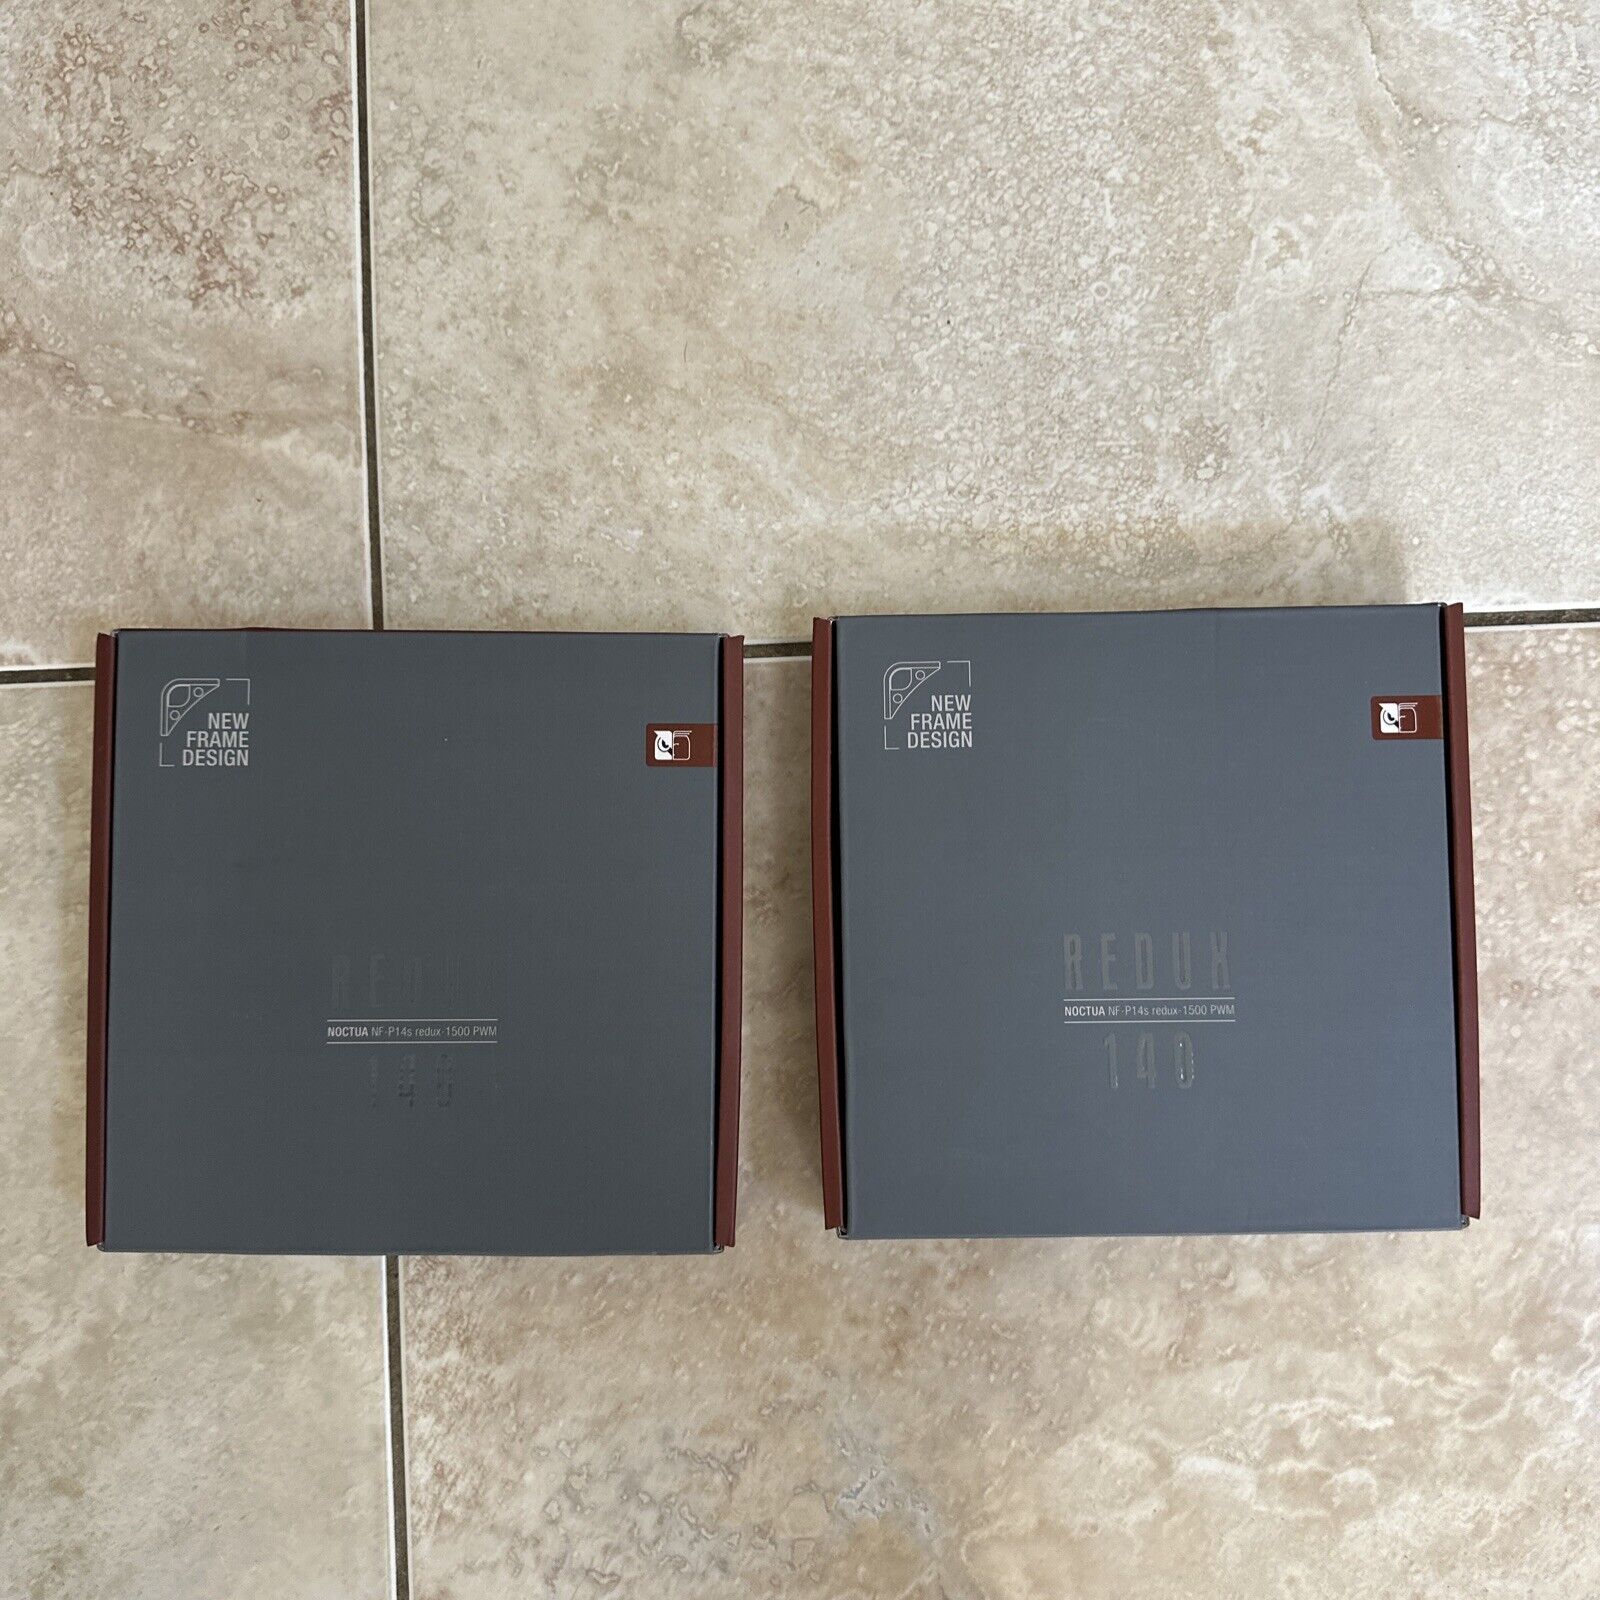 (SET OF TWO) Noctua NF-P14s redux-1500 PWM NEW